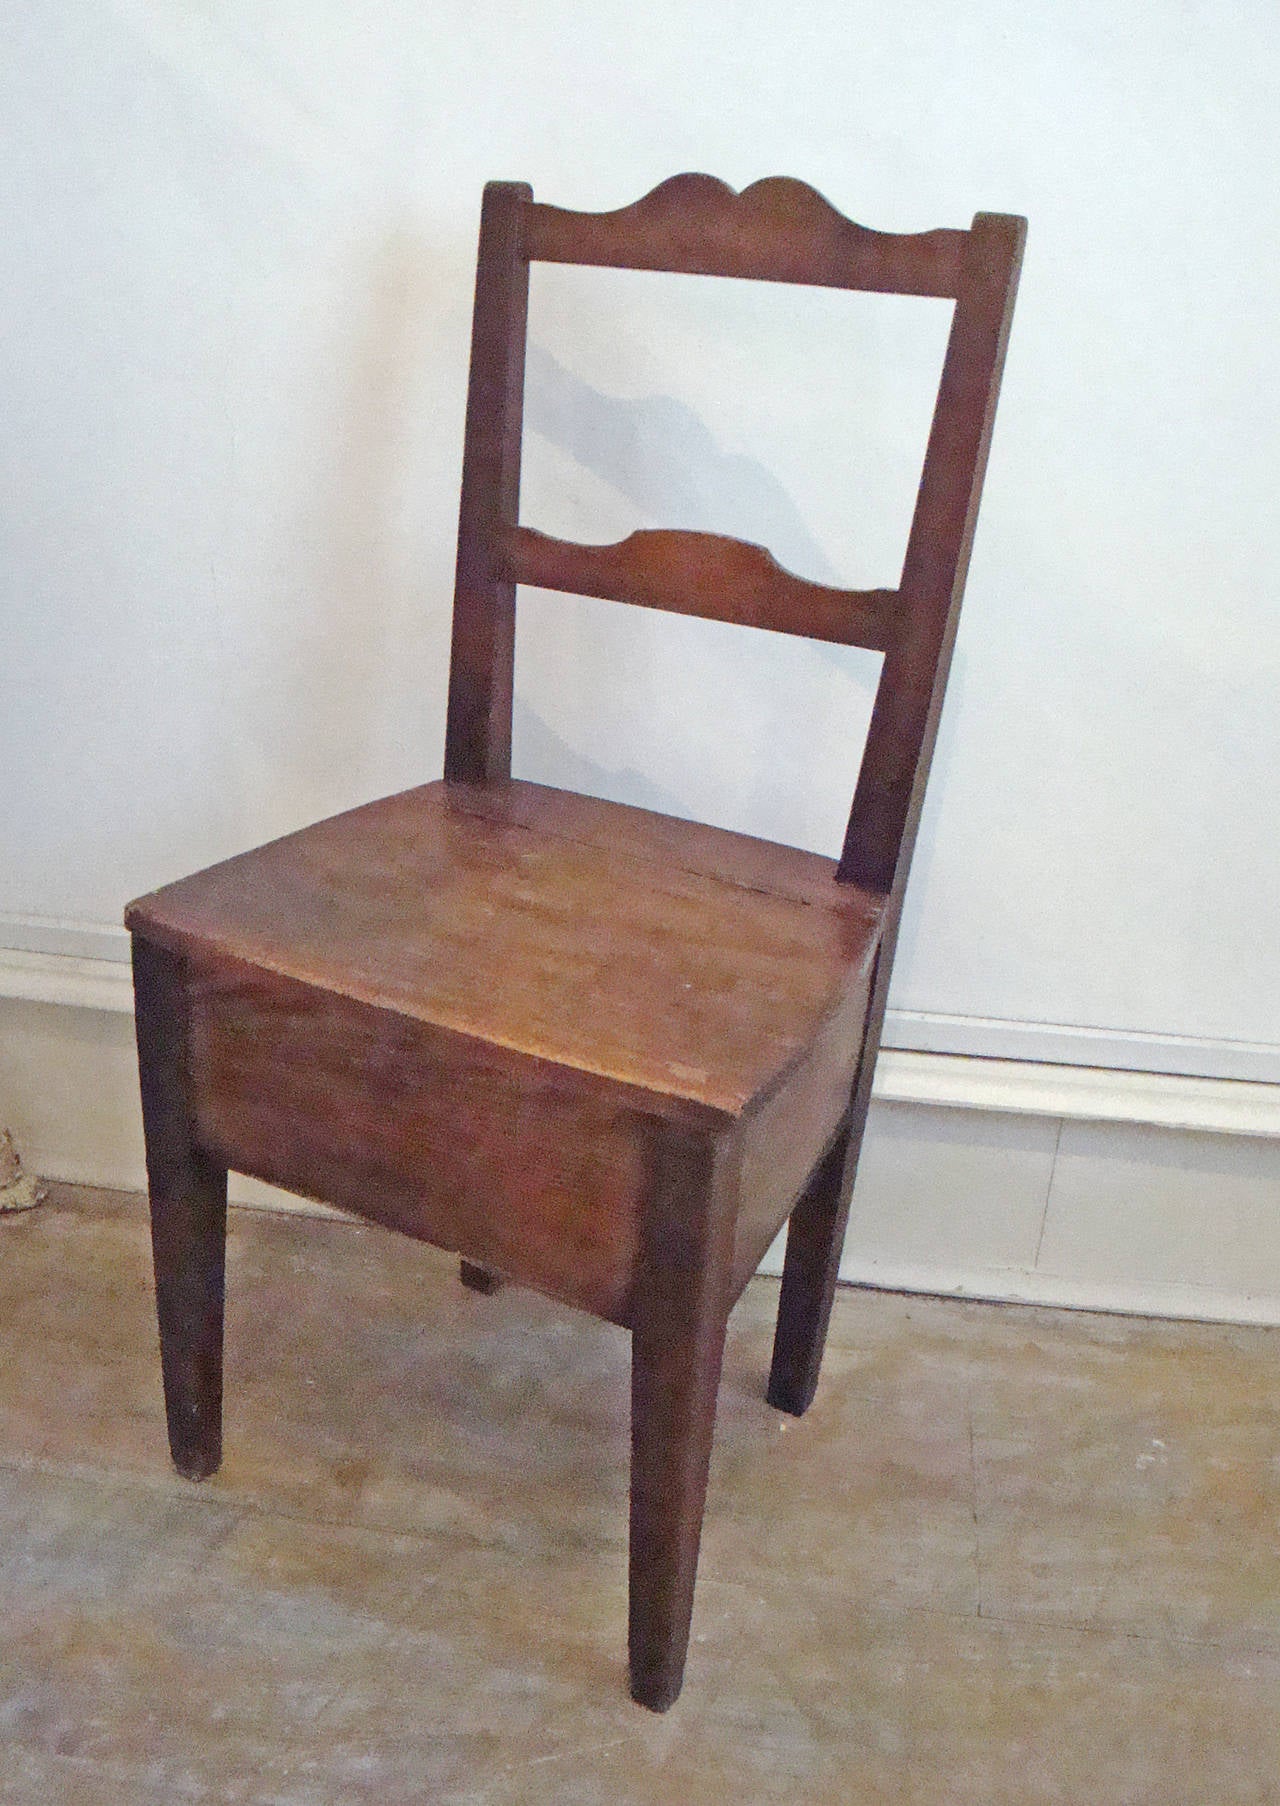 Sweet little 19th century shoe shine chair, the seat lifts up to store brushes and polish.